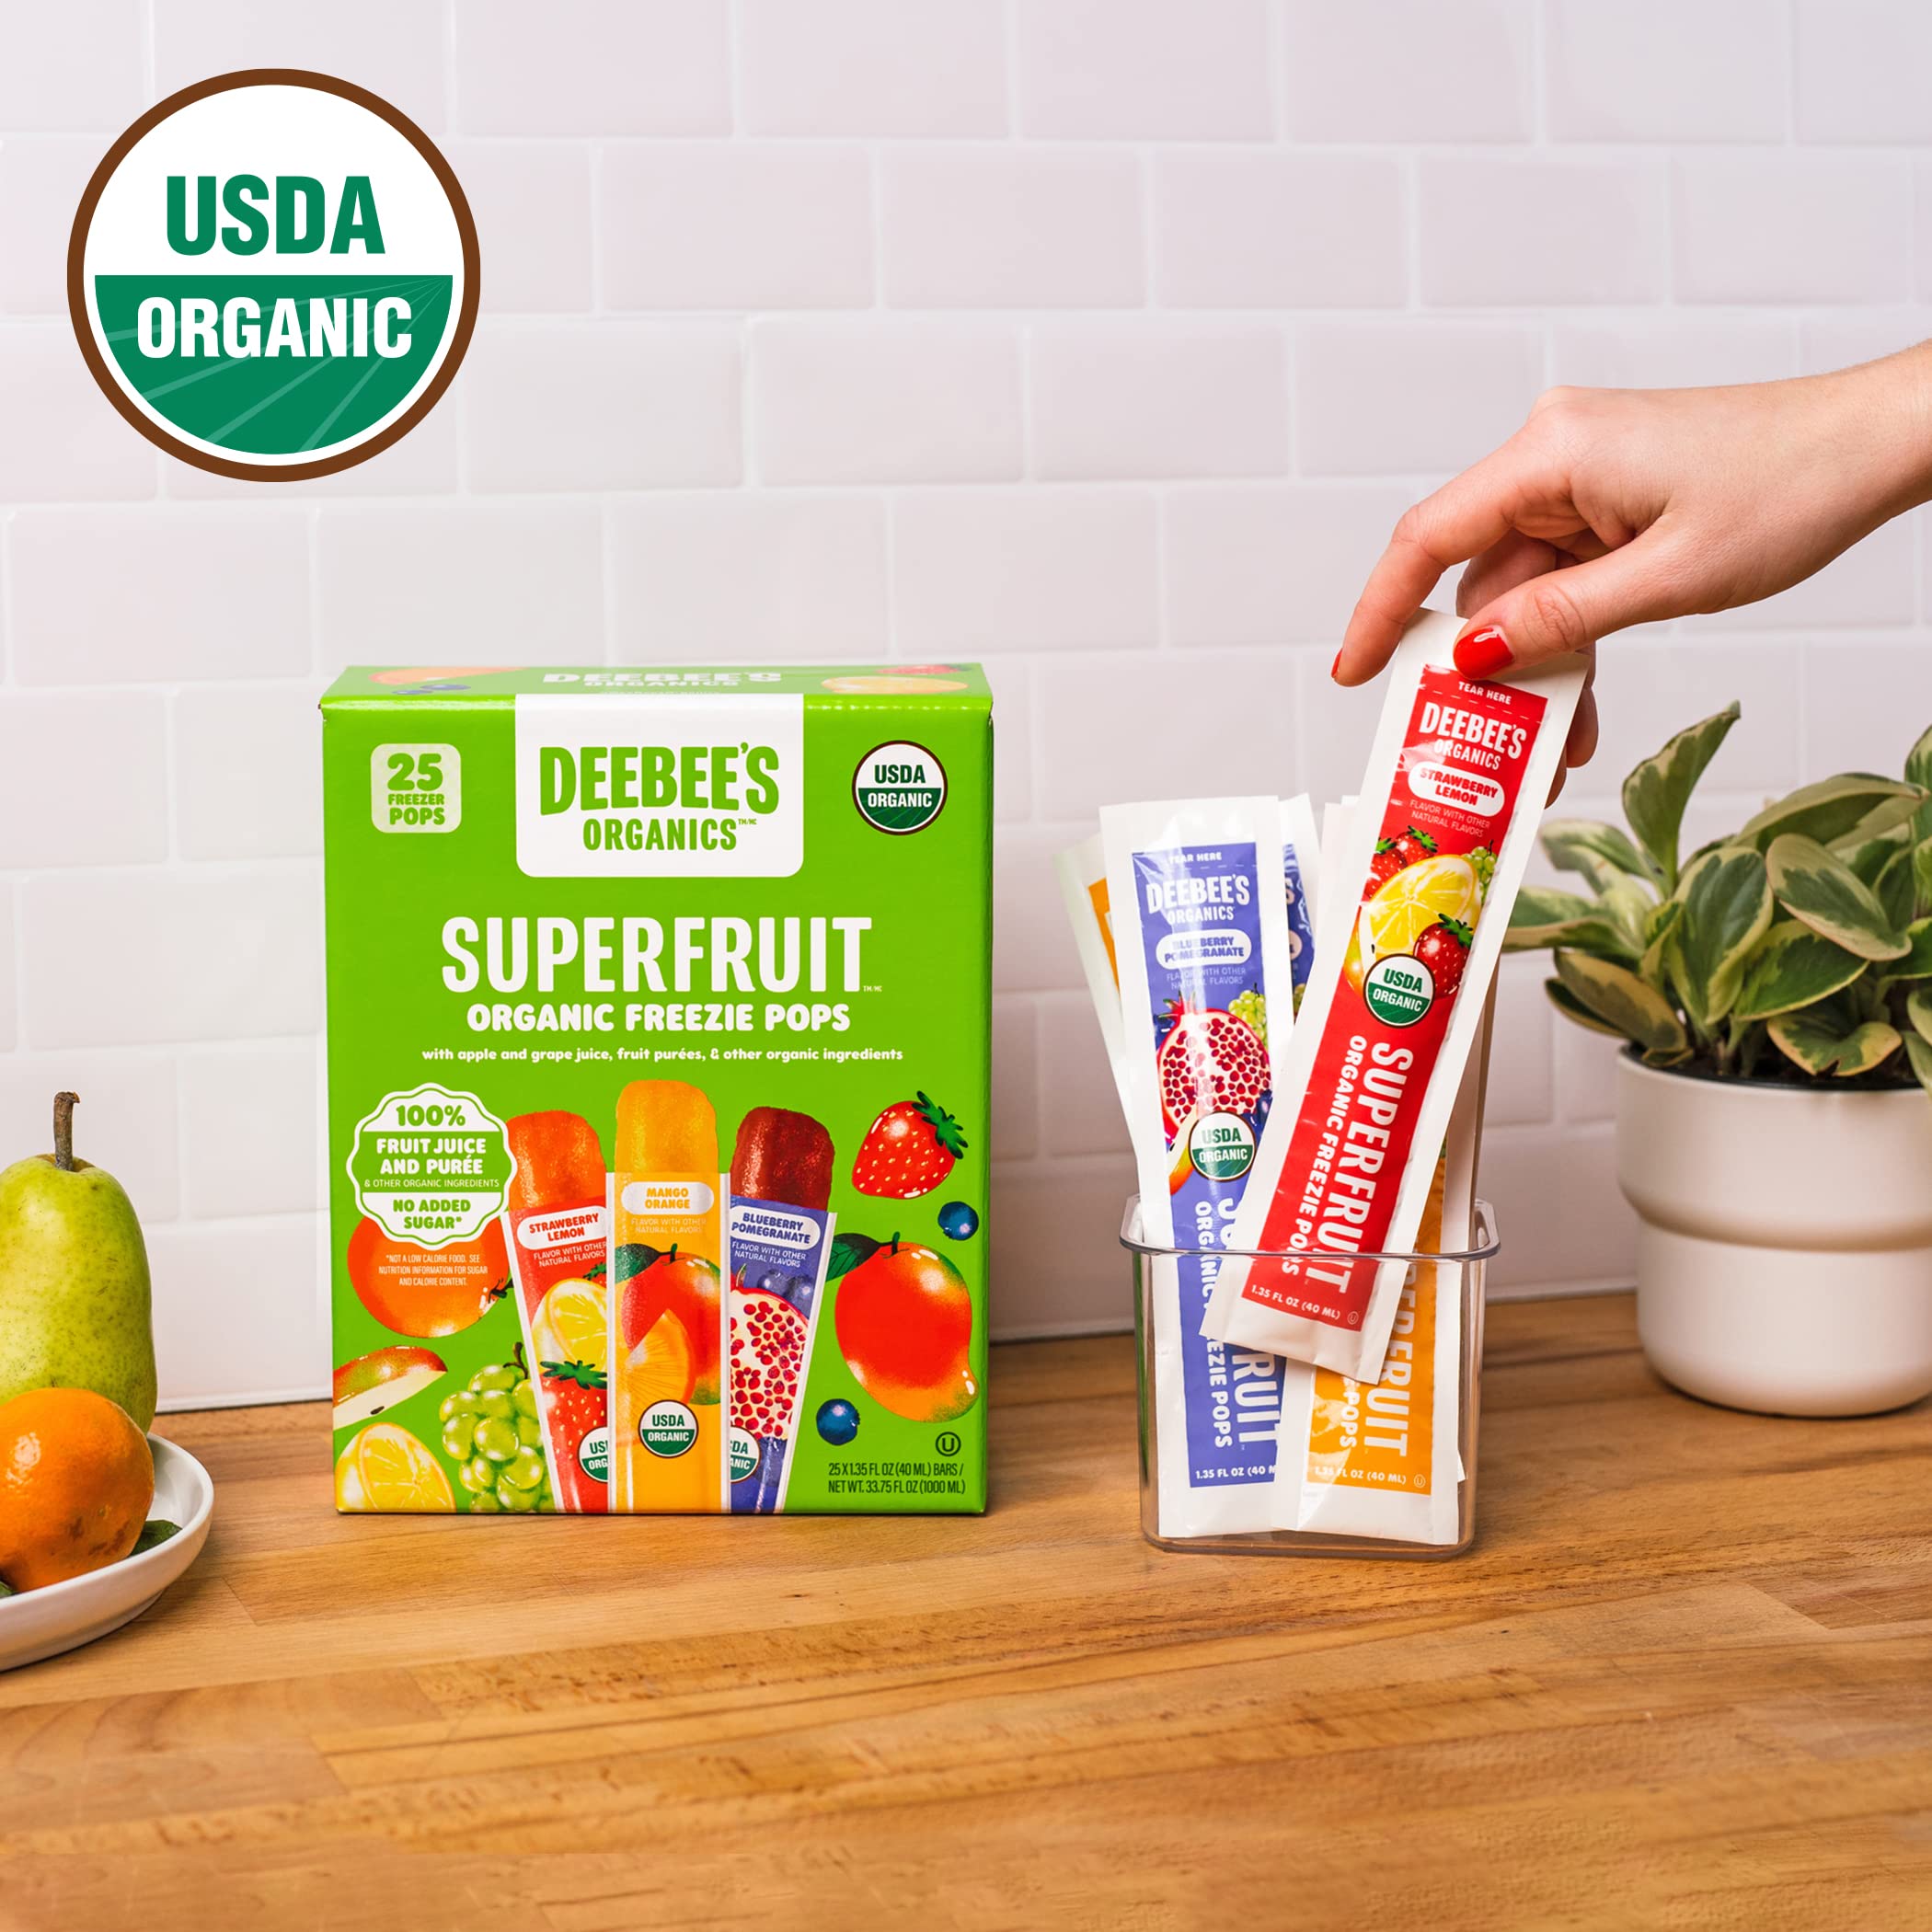 DeeBee's Organics Classic SuperFruit Freezie Pops, No Added Sugars, No Artificial Flavors or Colors Freezer Pops (Pack of 25)